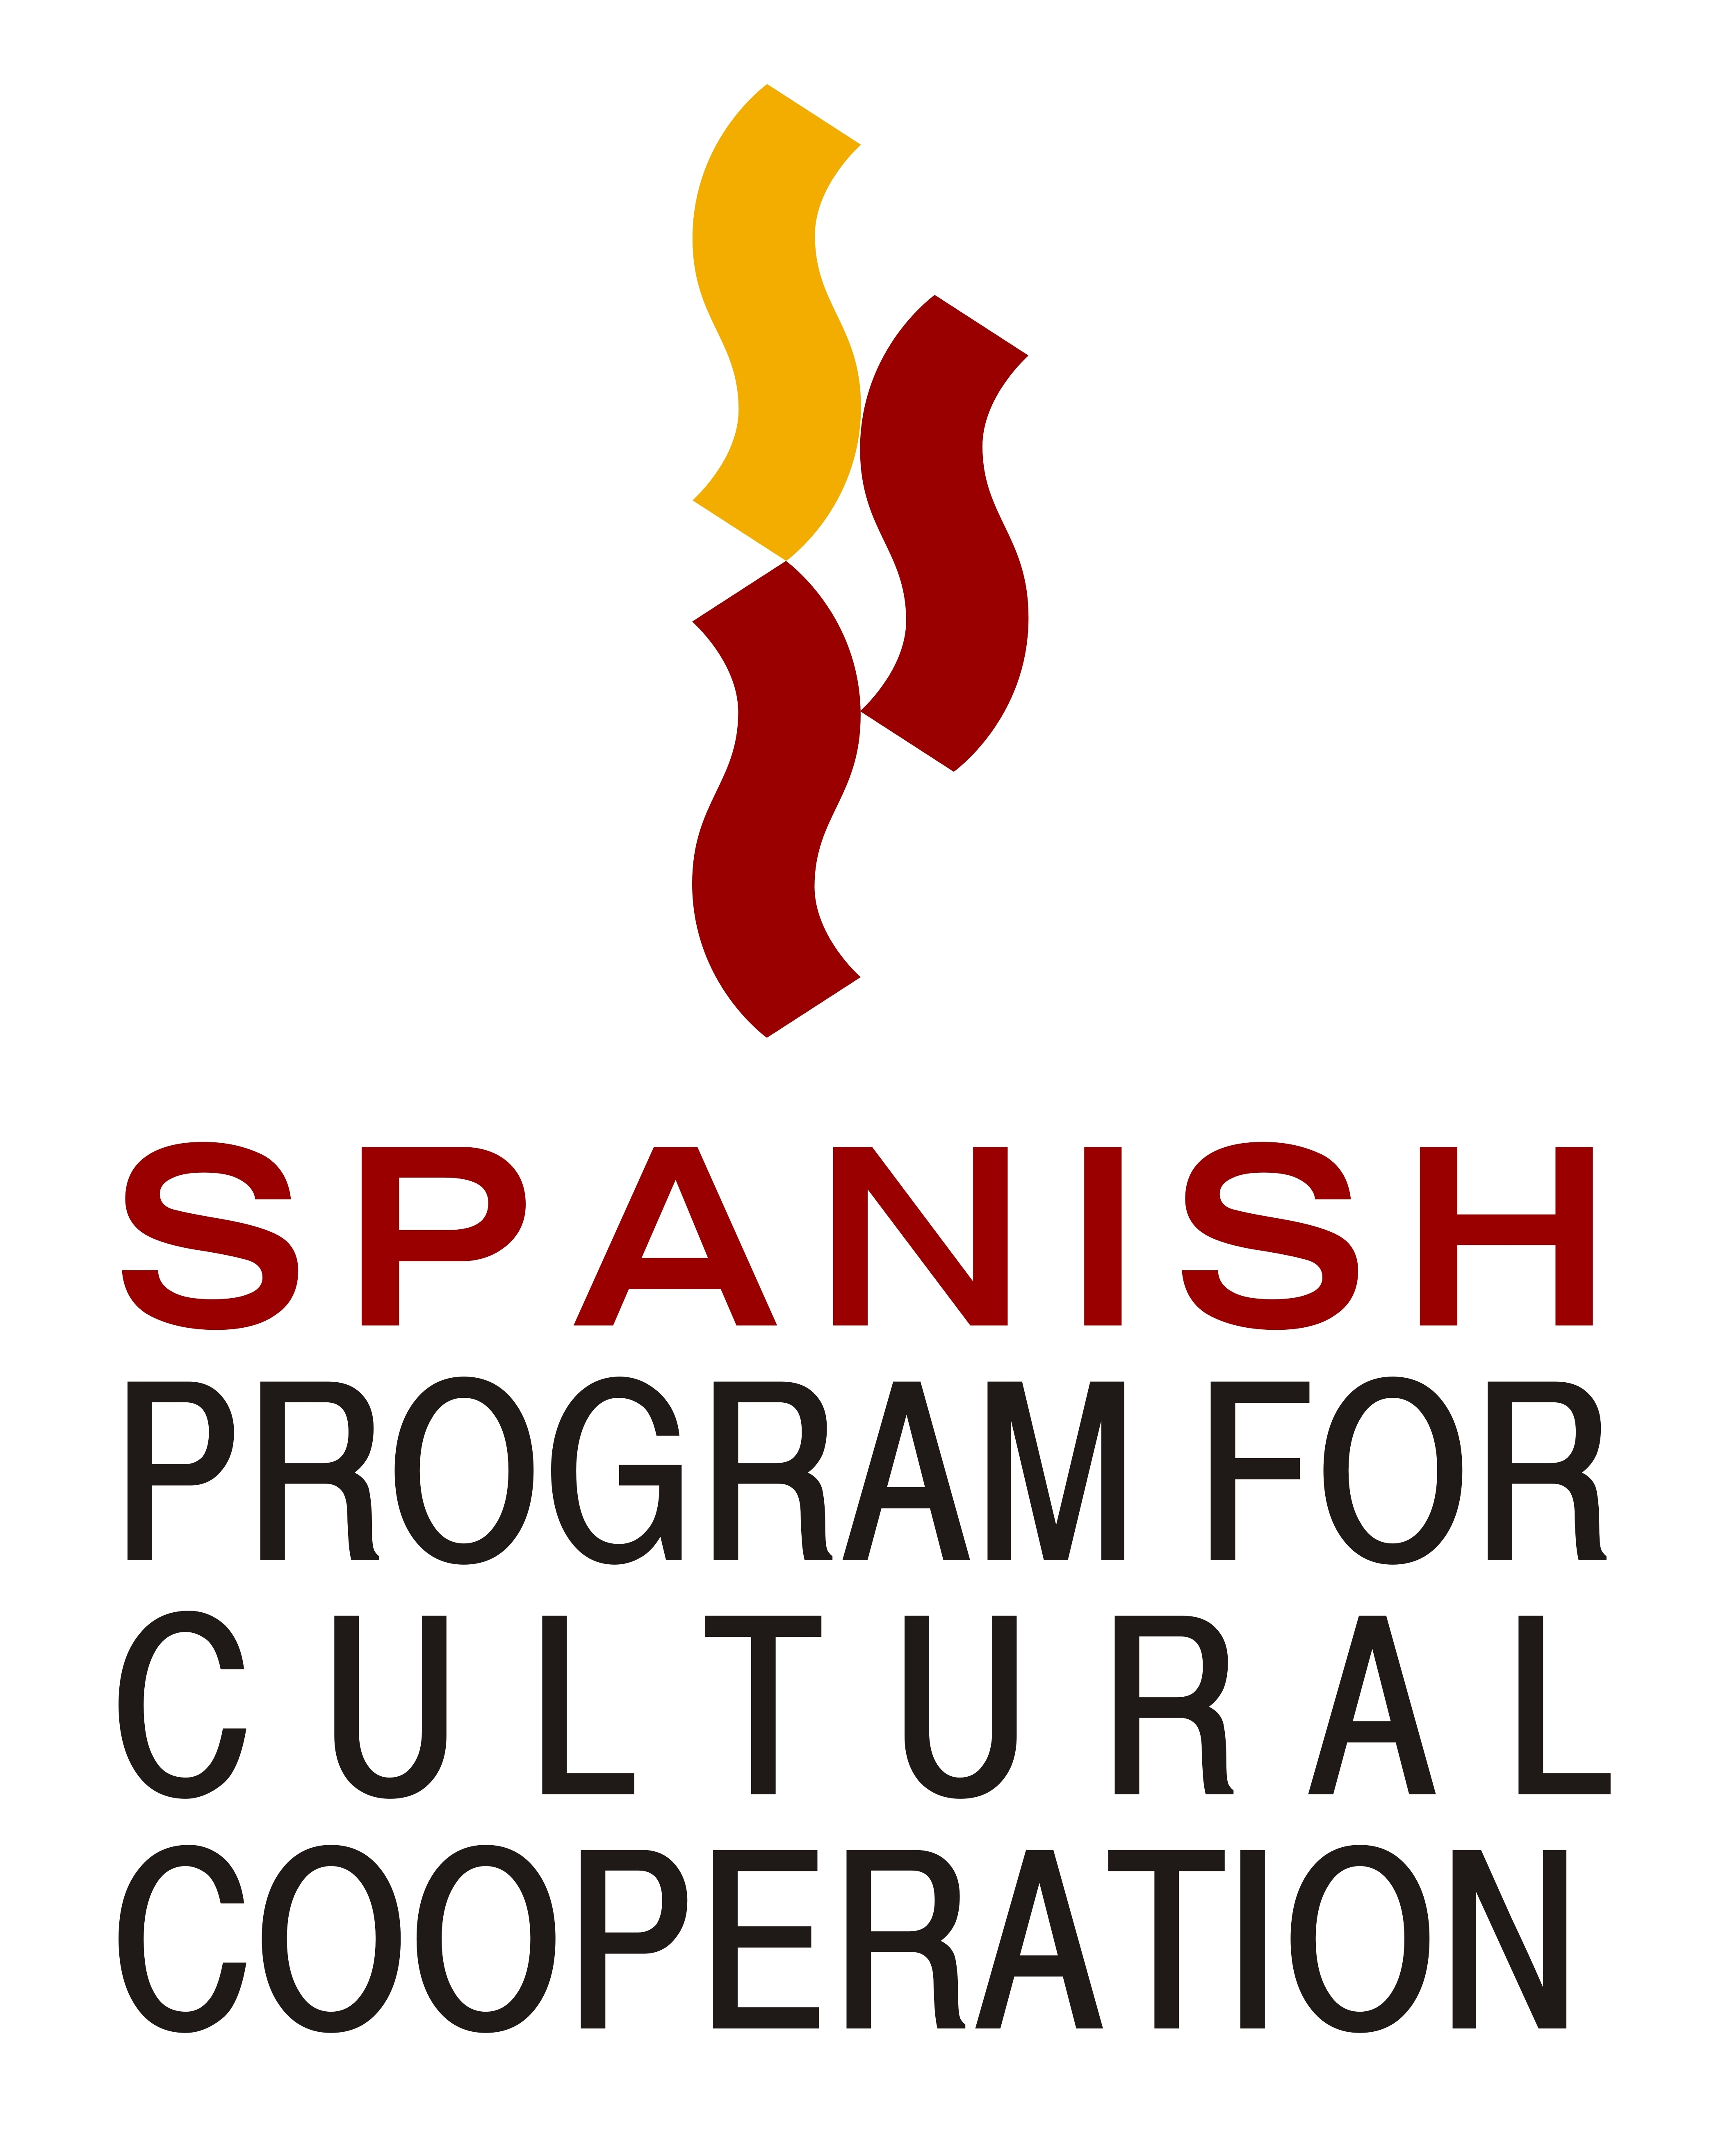 Spanish Program for Cultural Cooperation